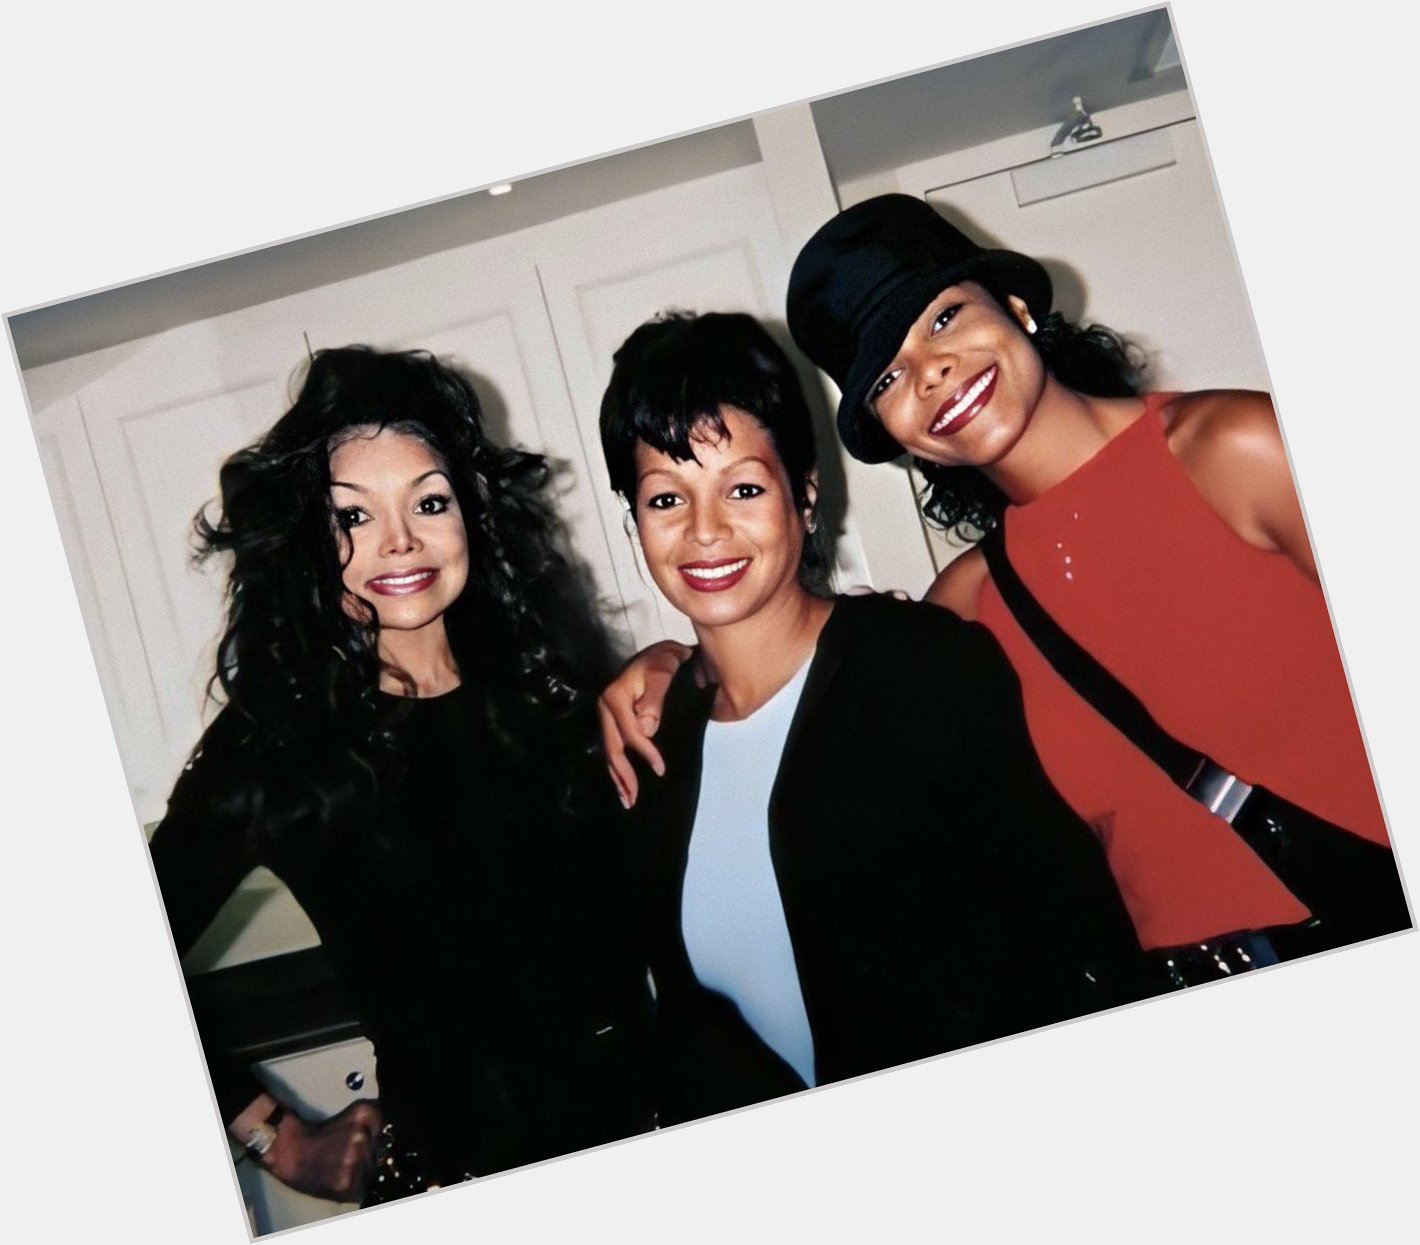 Happy Birthday to the lovely Jackson sisters and Rebbie Jackson.  